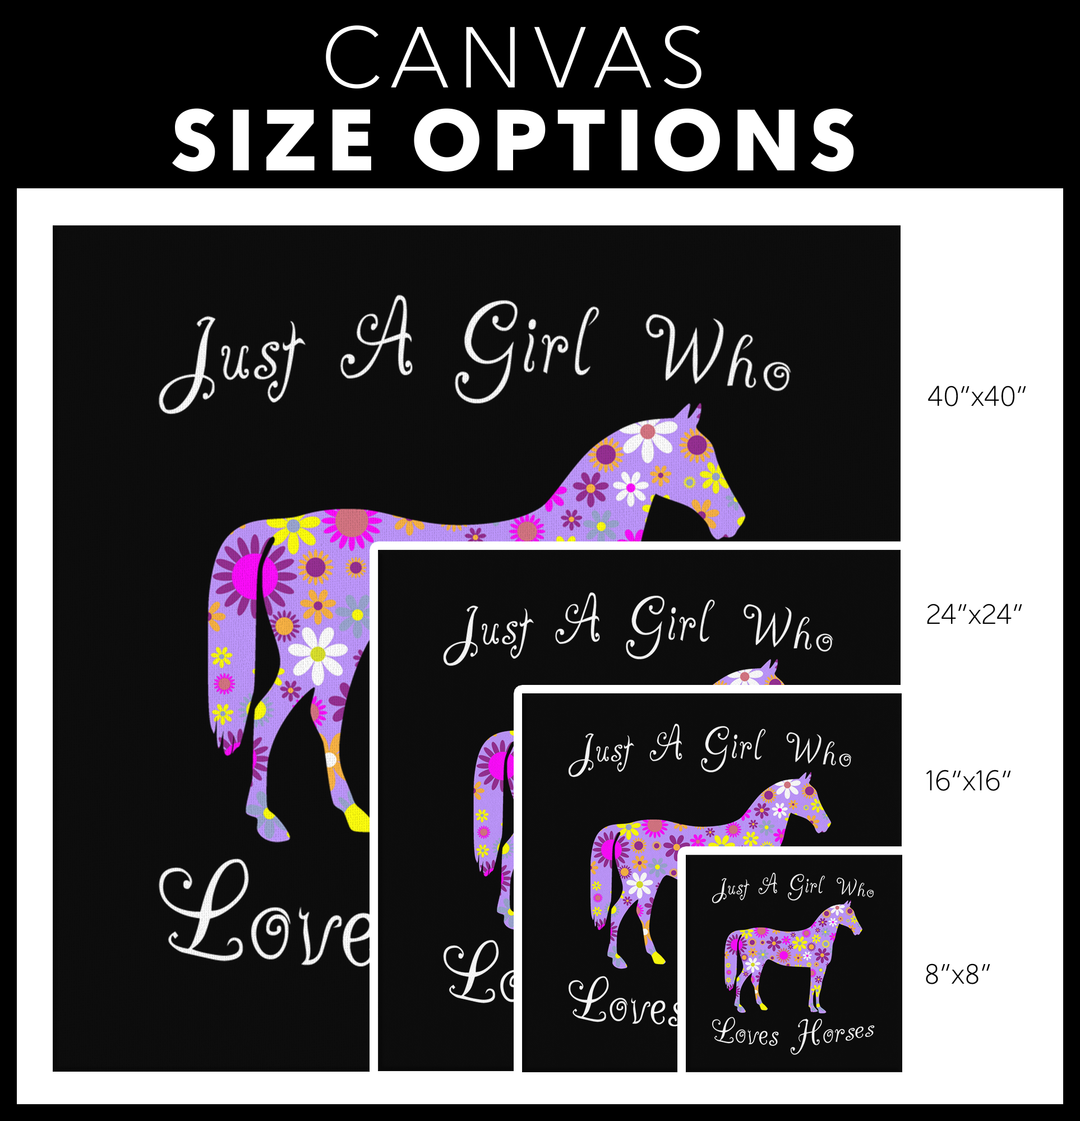 Just A Girl Who Loves Horses Canvas Wall Art - Size Options